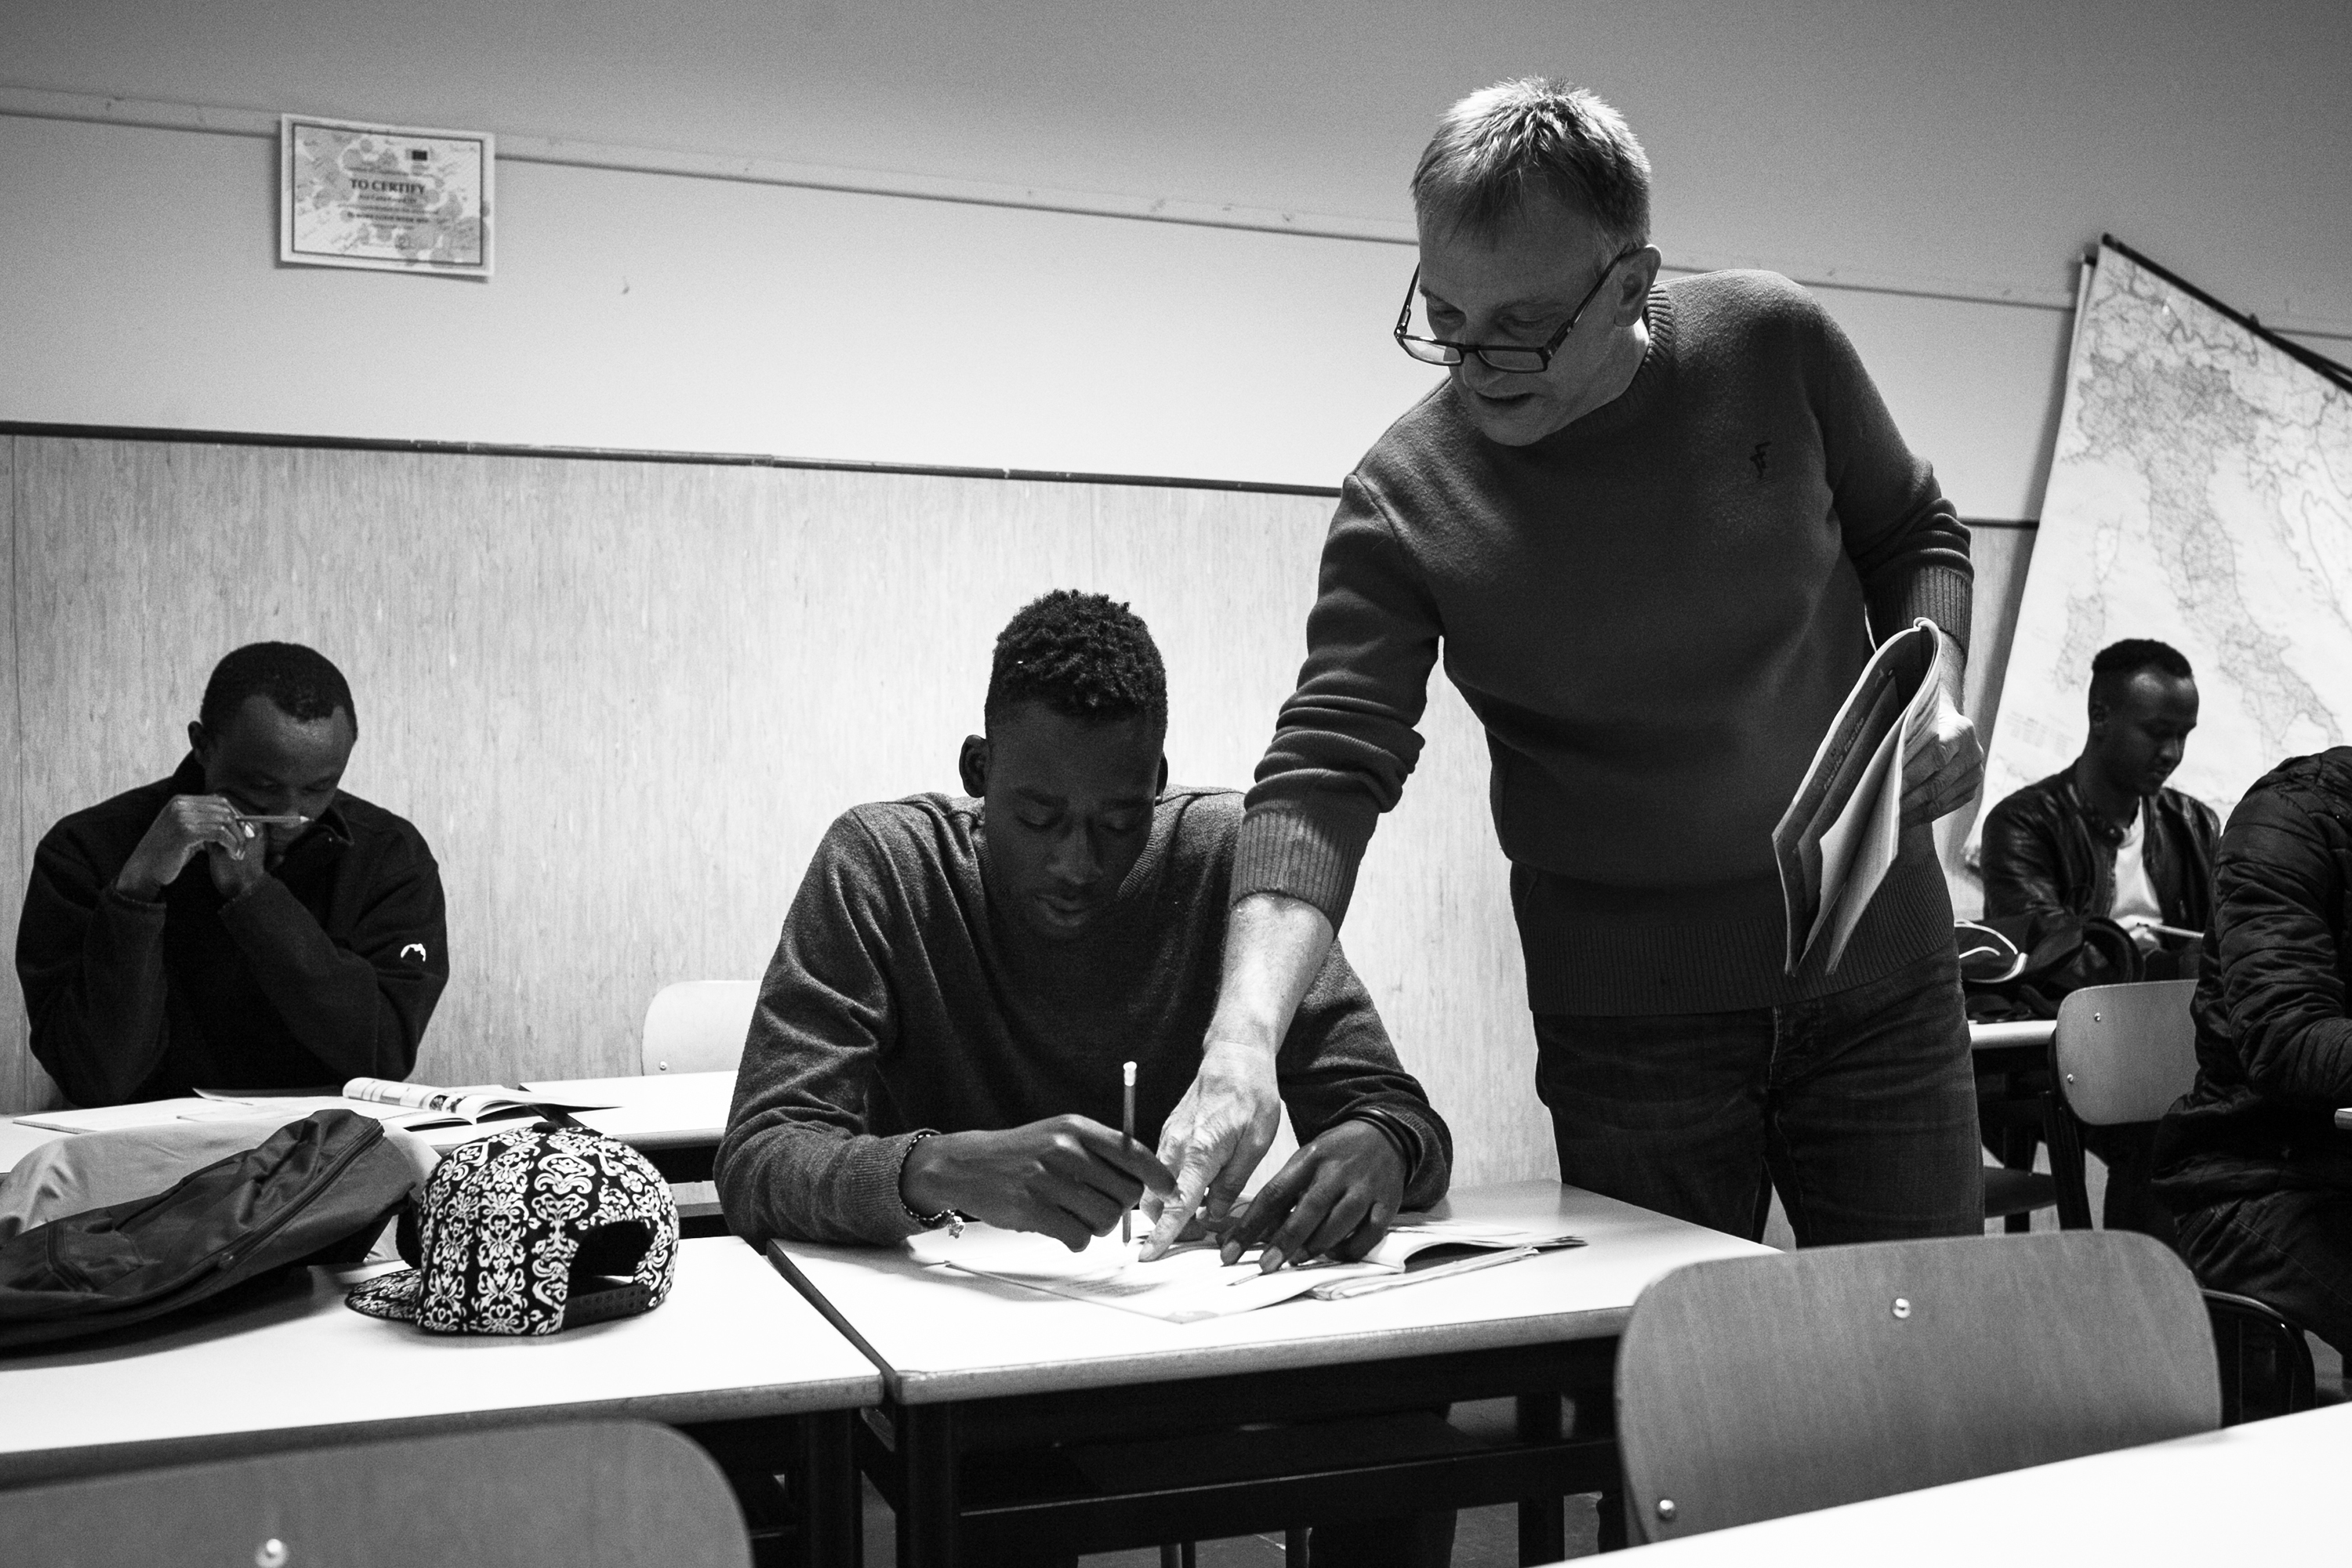 Malick, along with his colleagues from Hotel Colibri as well as from other migrant centers in Biella, attending Italian classes. All migrants receive Italian classes twice a week, in which they learn basic conversational skills to get on in their daily lives, as well as how to prepare their CV. (Photo: César Dezfuli)